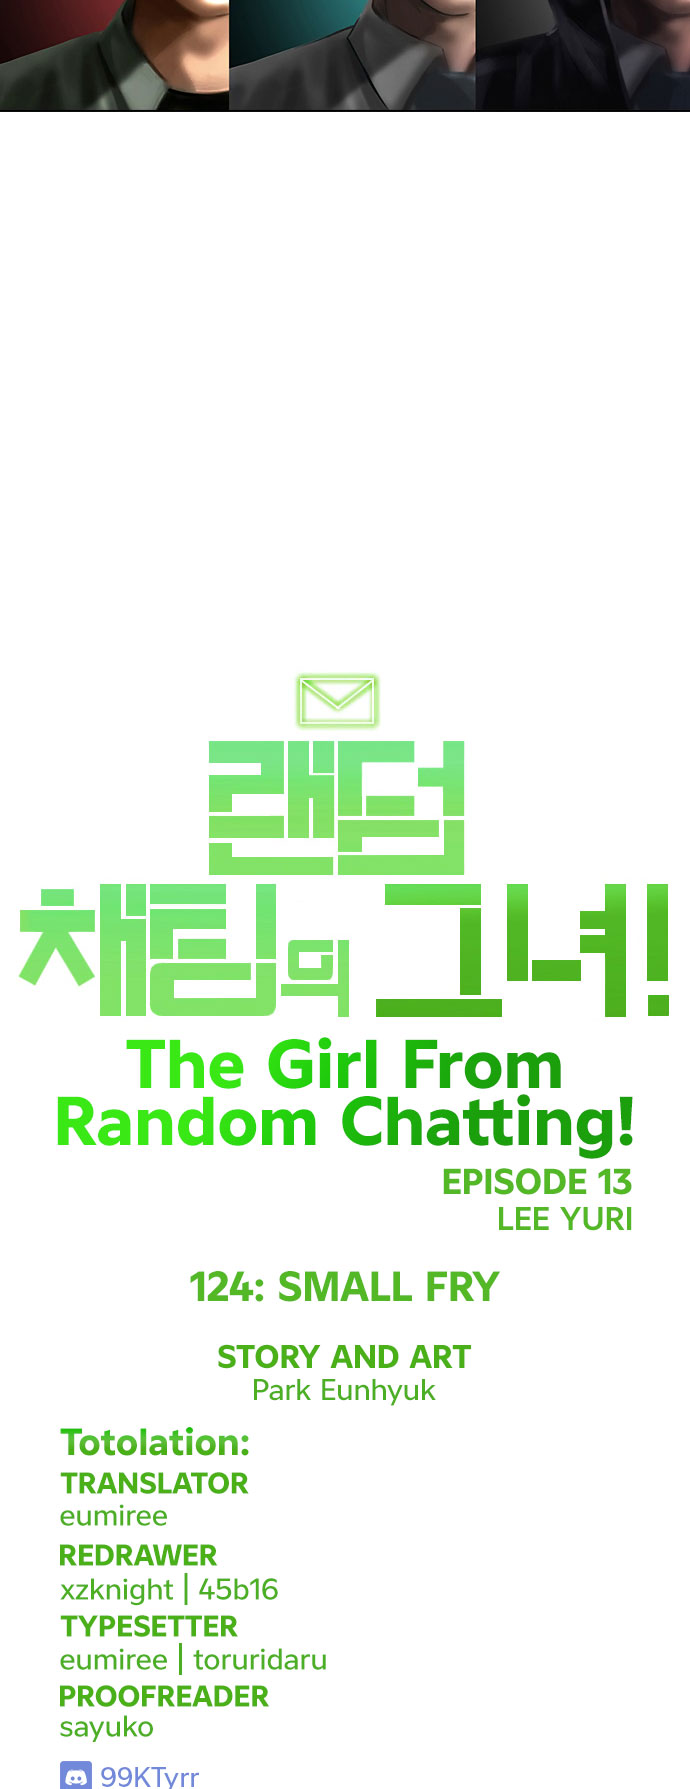 The Girl from Random Chatting! Ch. 124 Small Fry